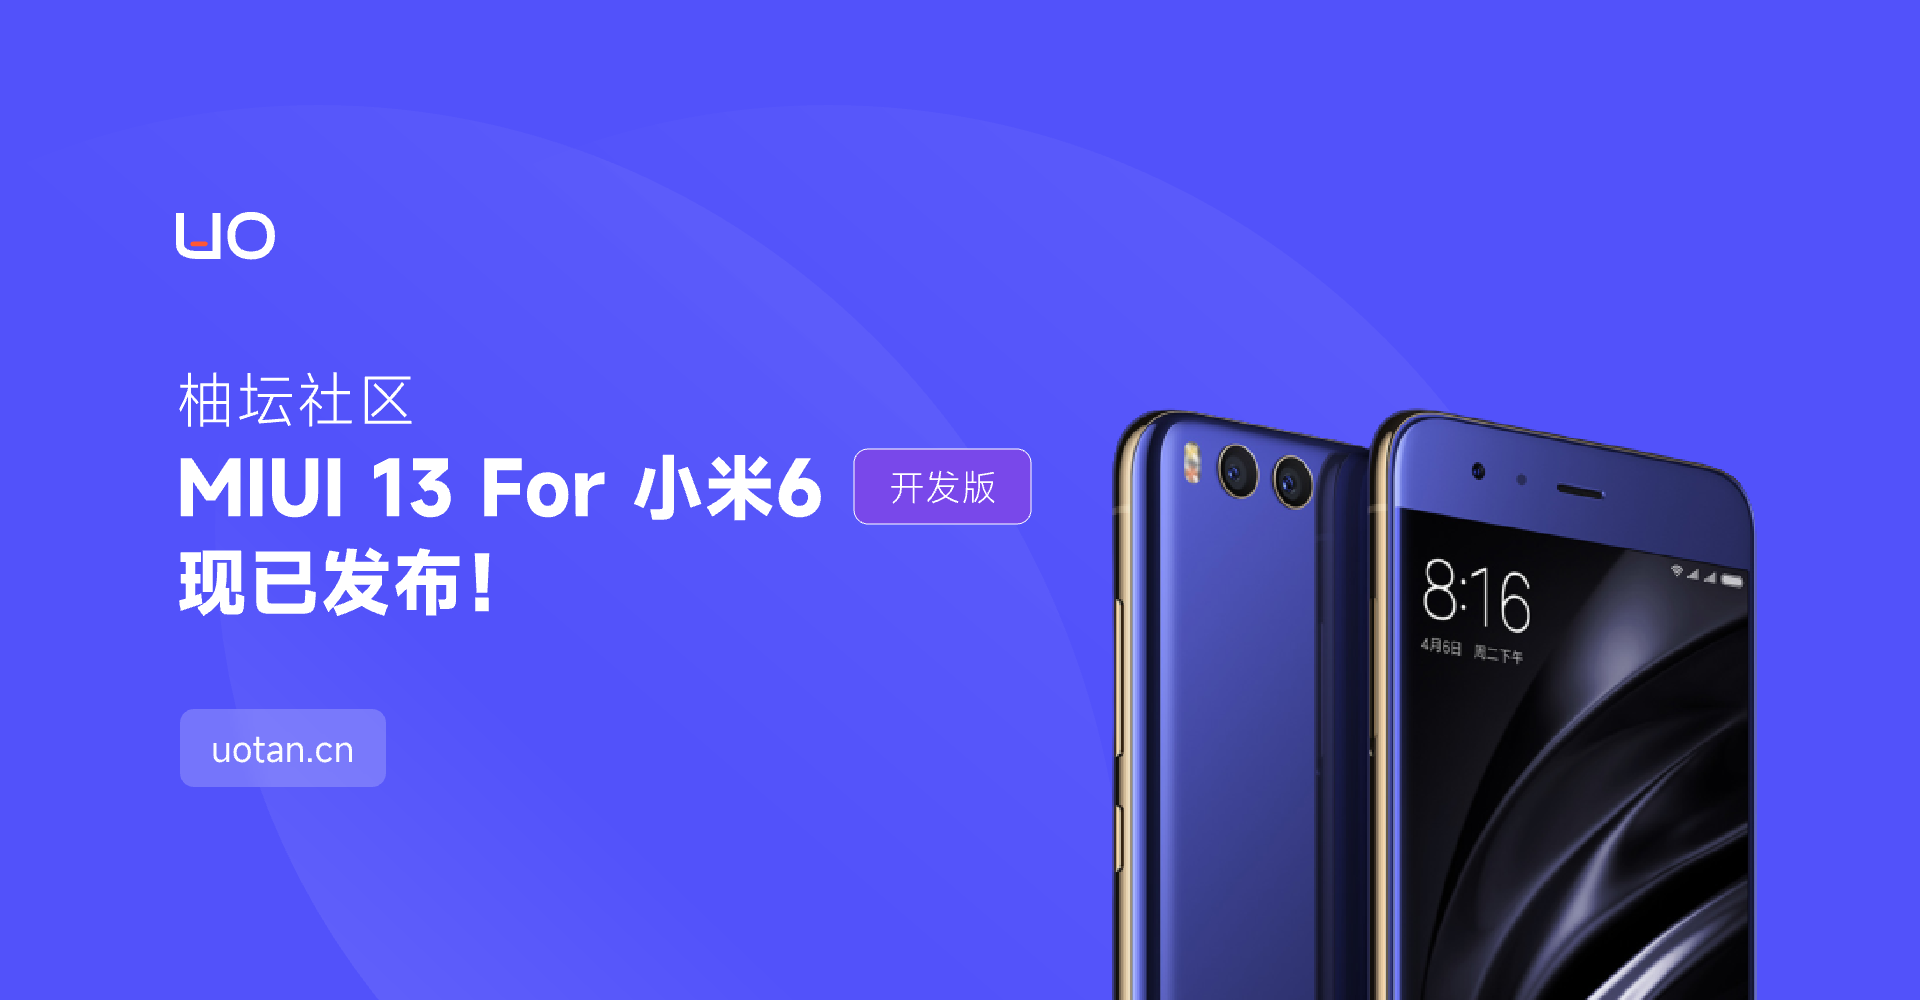 MIUI13 For 小米6.png